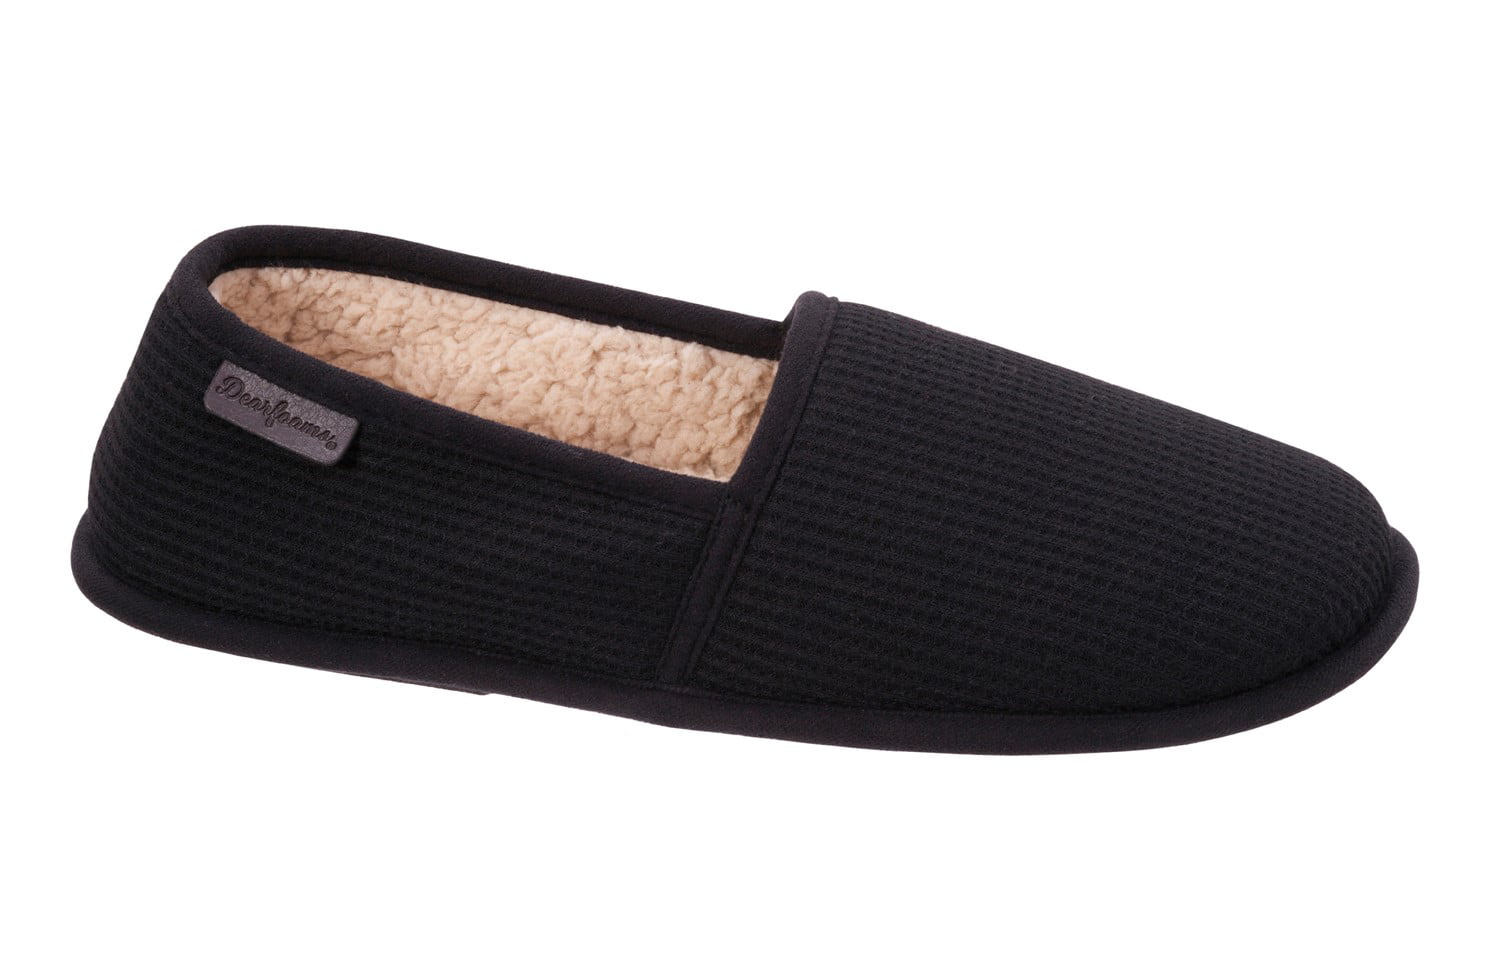 mens thermal slippers